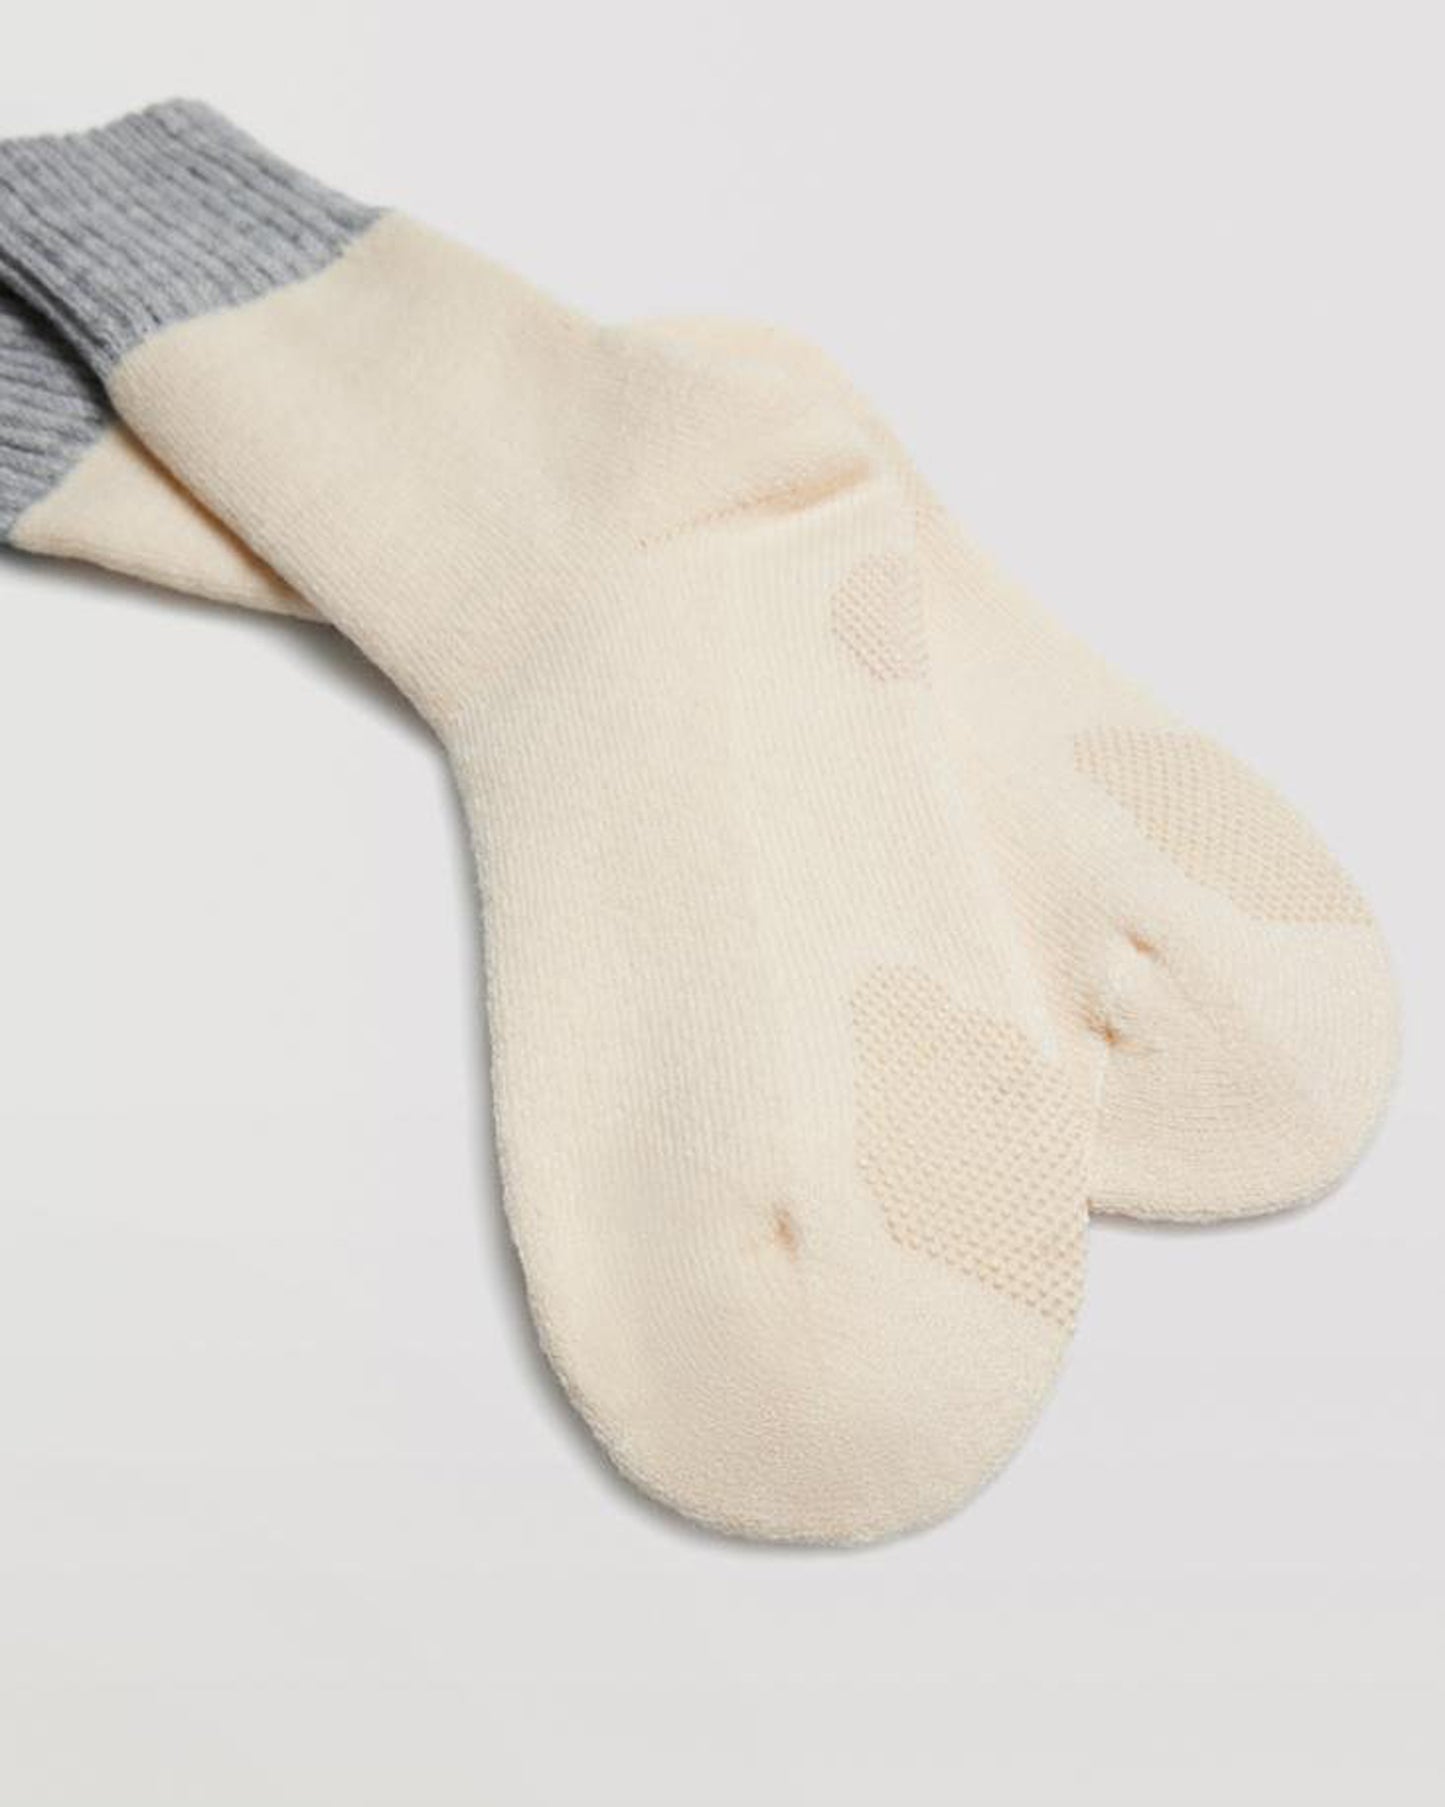 Ysabel Mora 12900 Gripper Socks - Warm cream slipper socks with a fluffy terry lining and anti-slip gripper on the sole and light grey contrasting deep ribbed cuff.